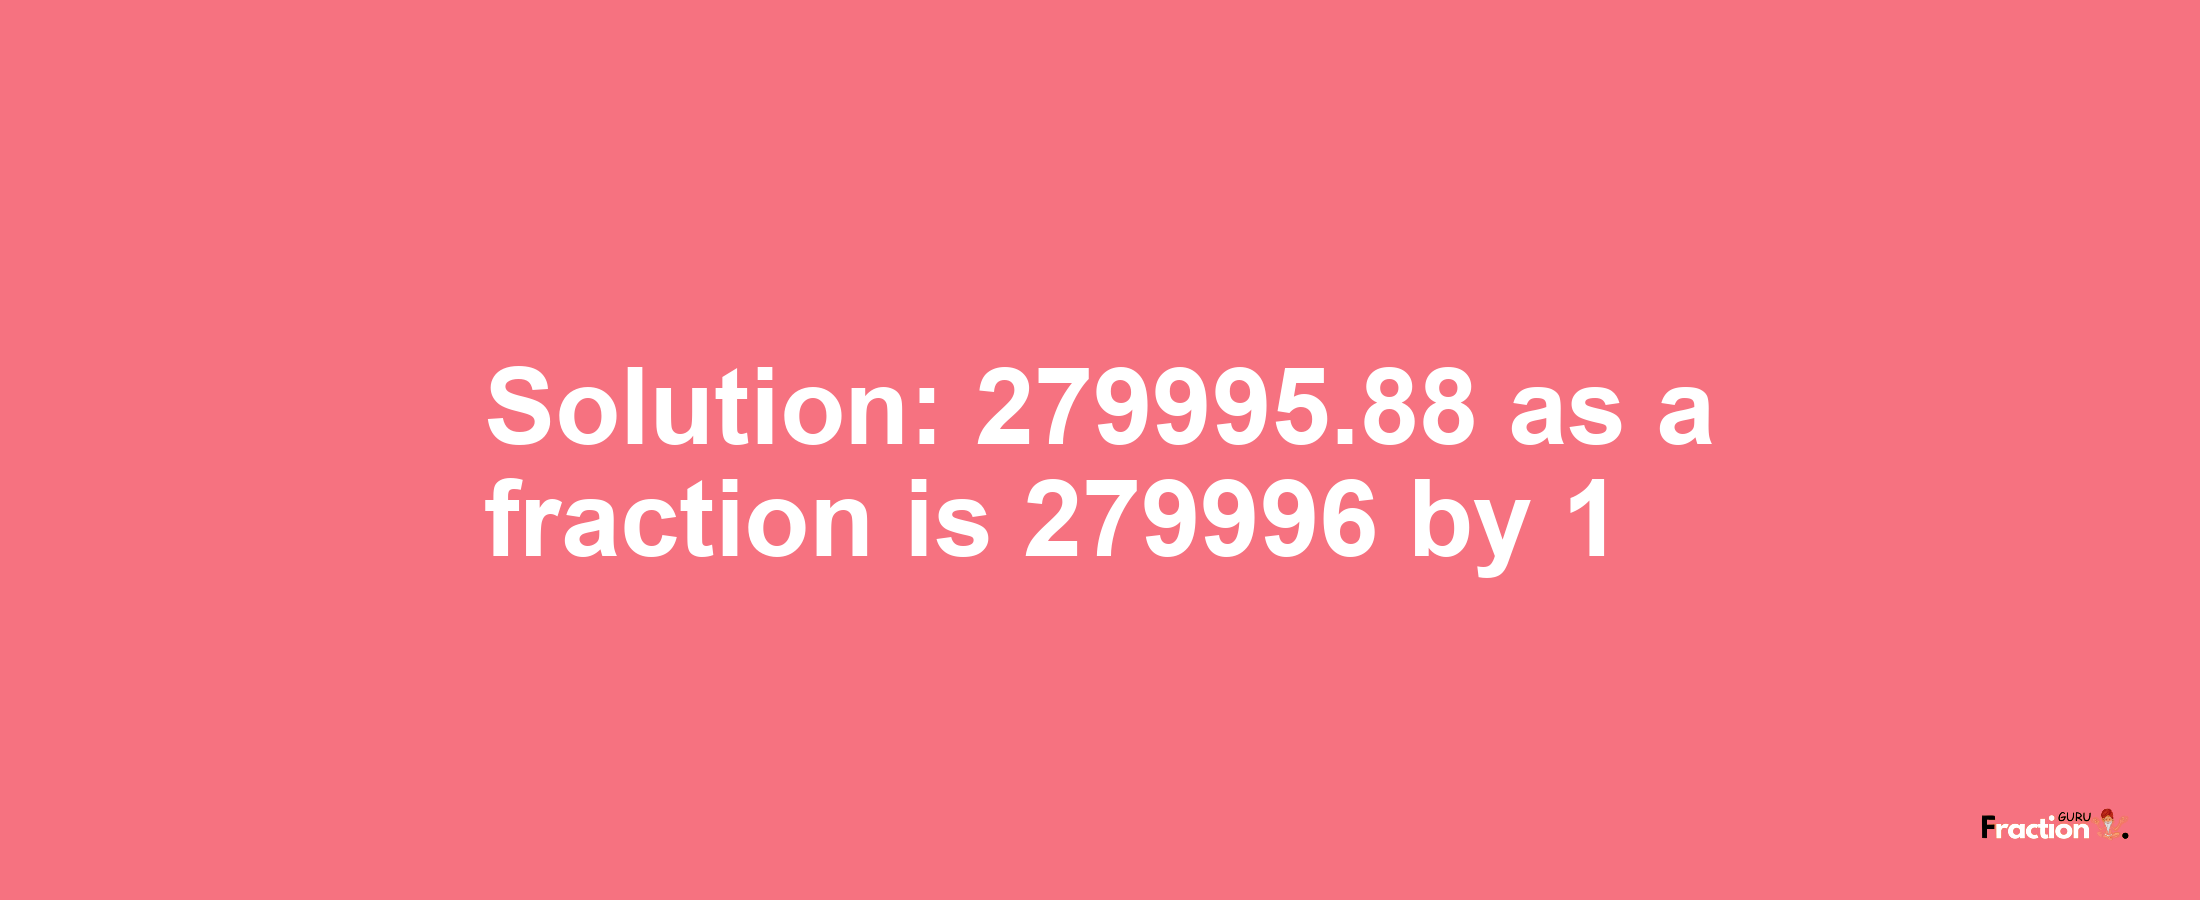 Solution:279995.88 as a fraction is 279996/1